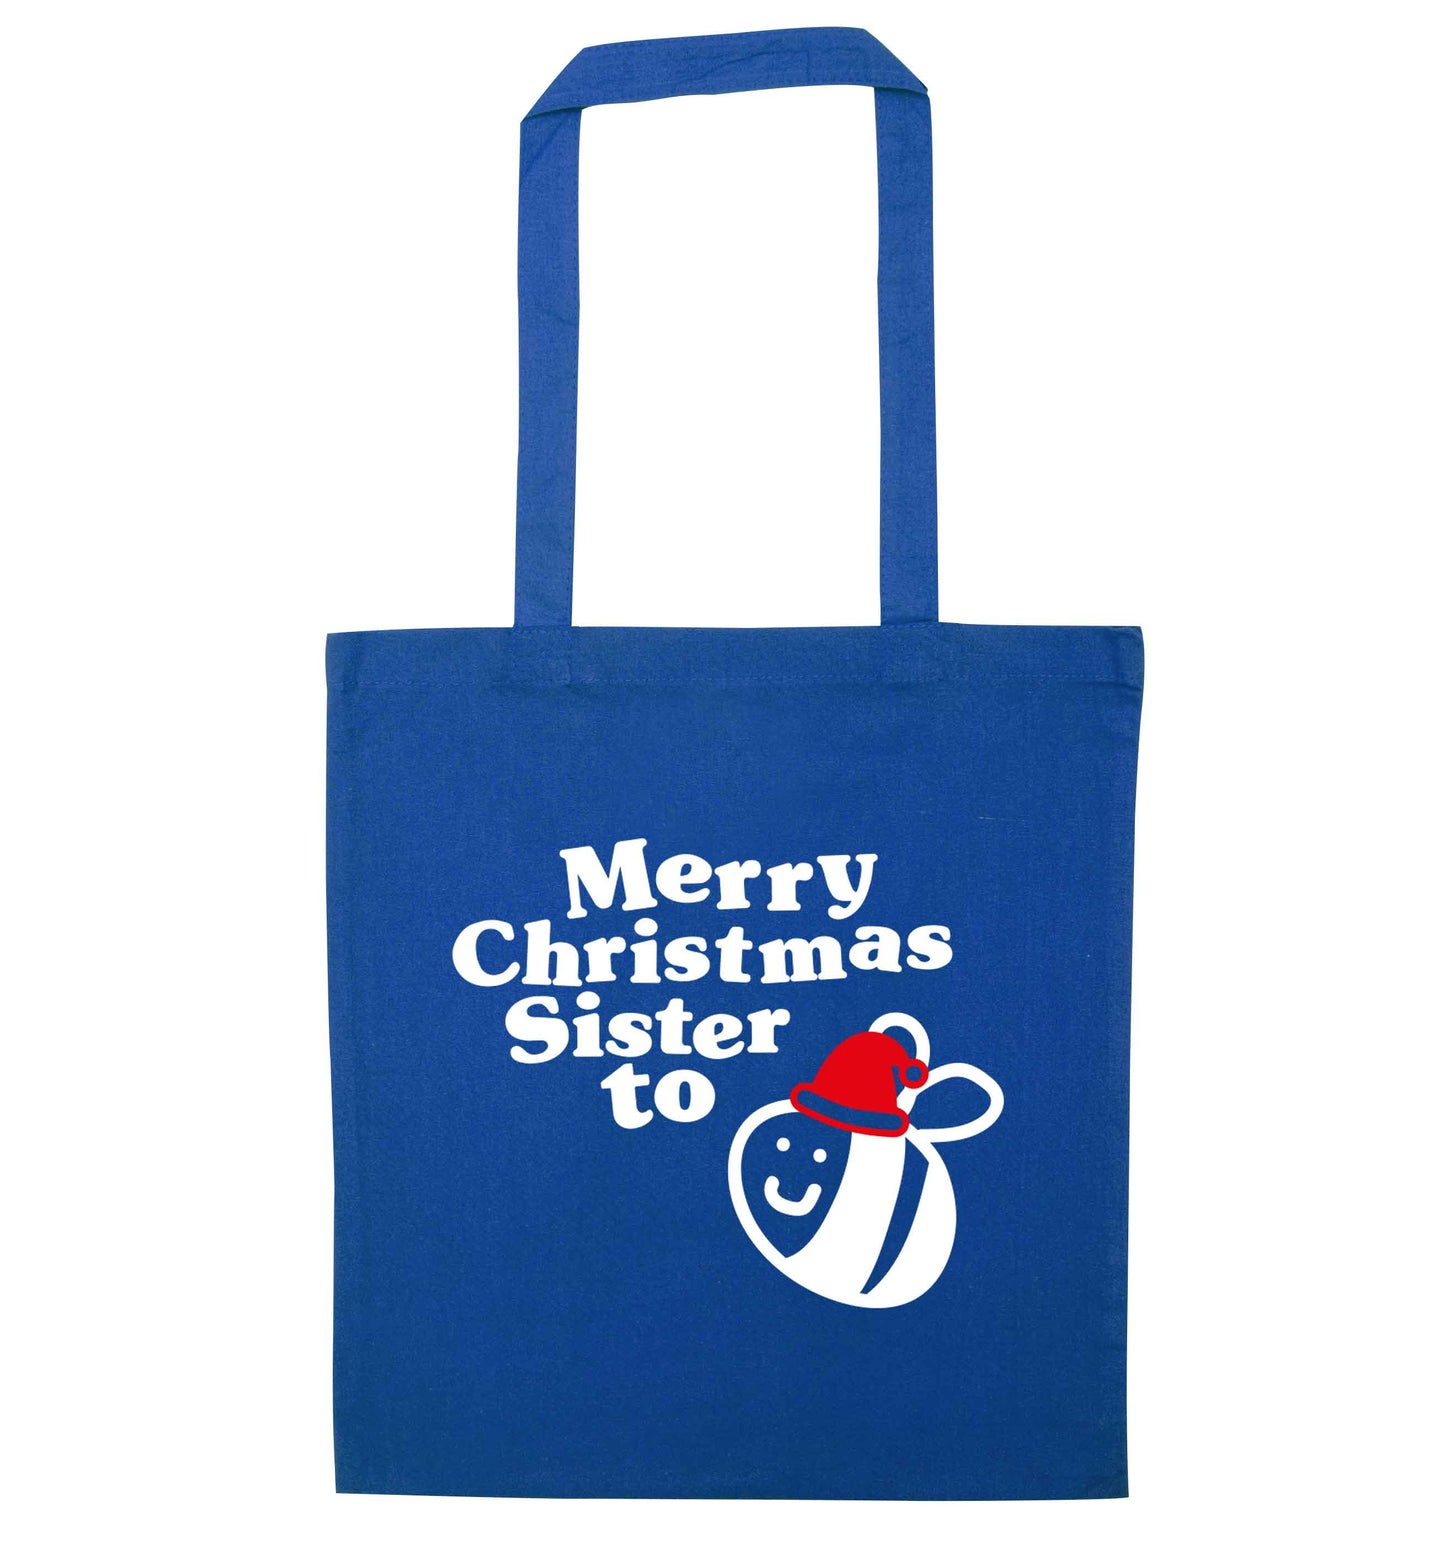 Merry Christmas sister to be blue tote bag